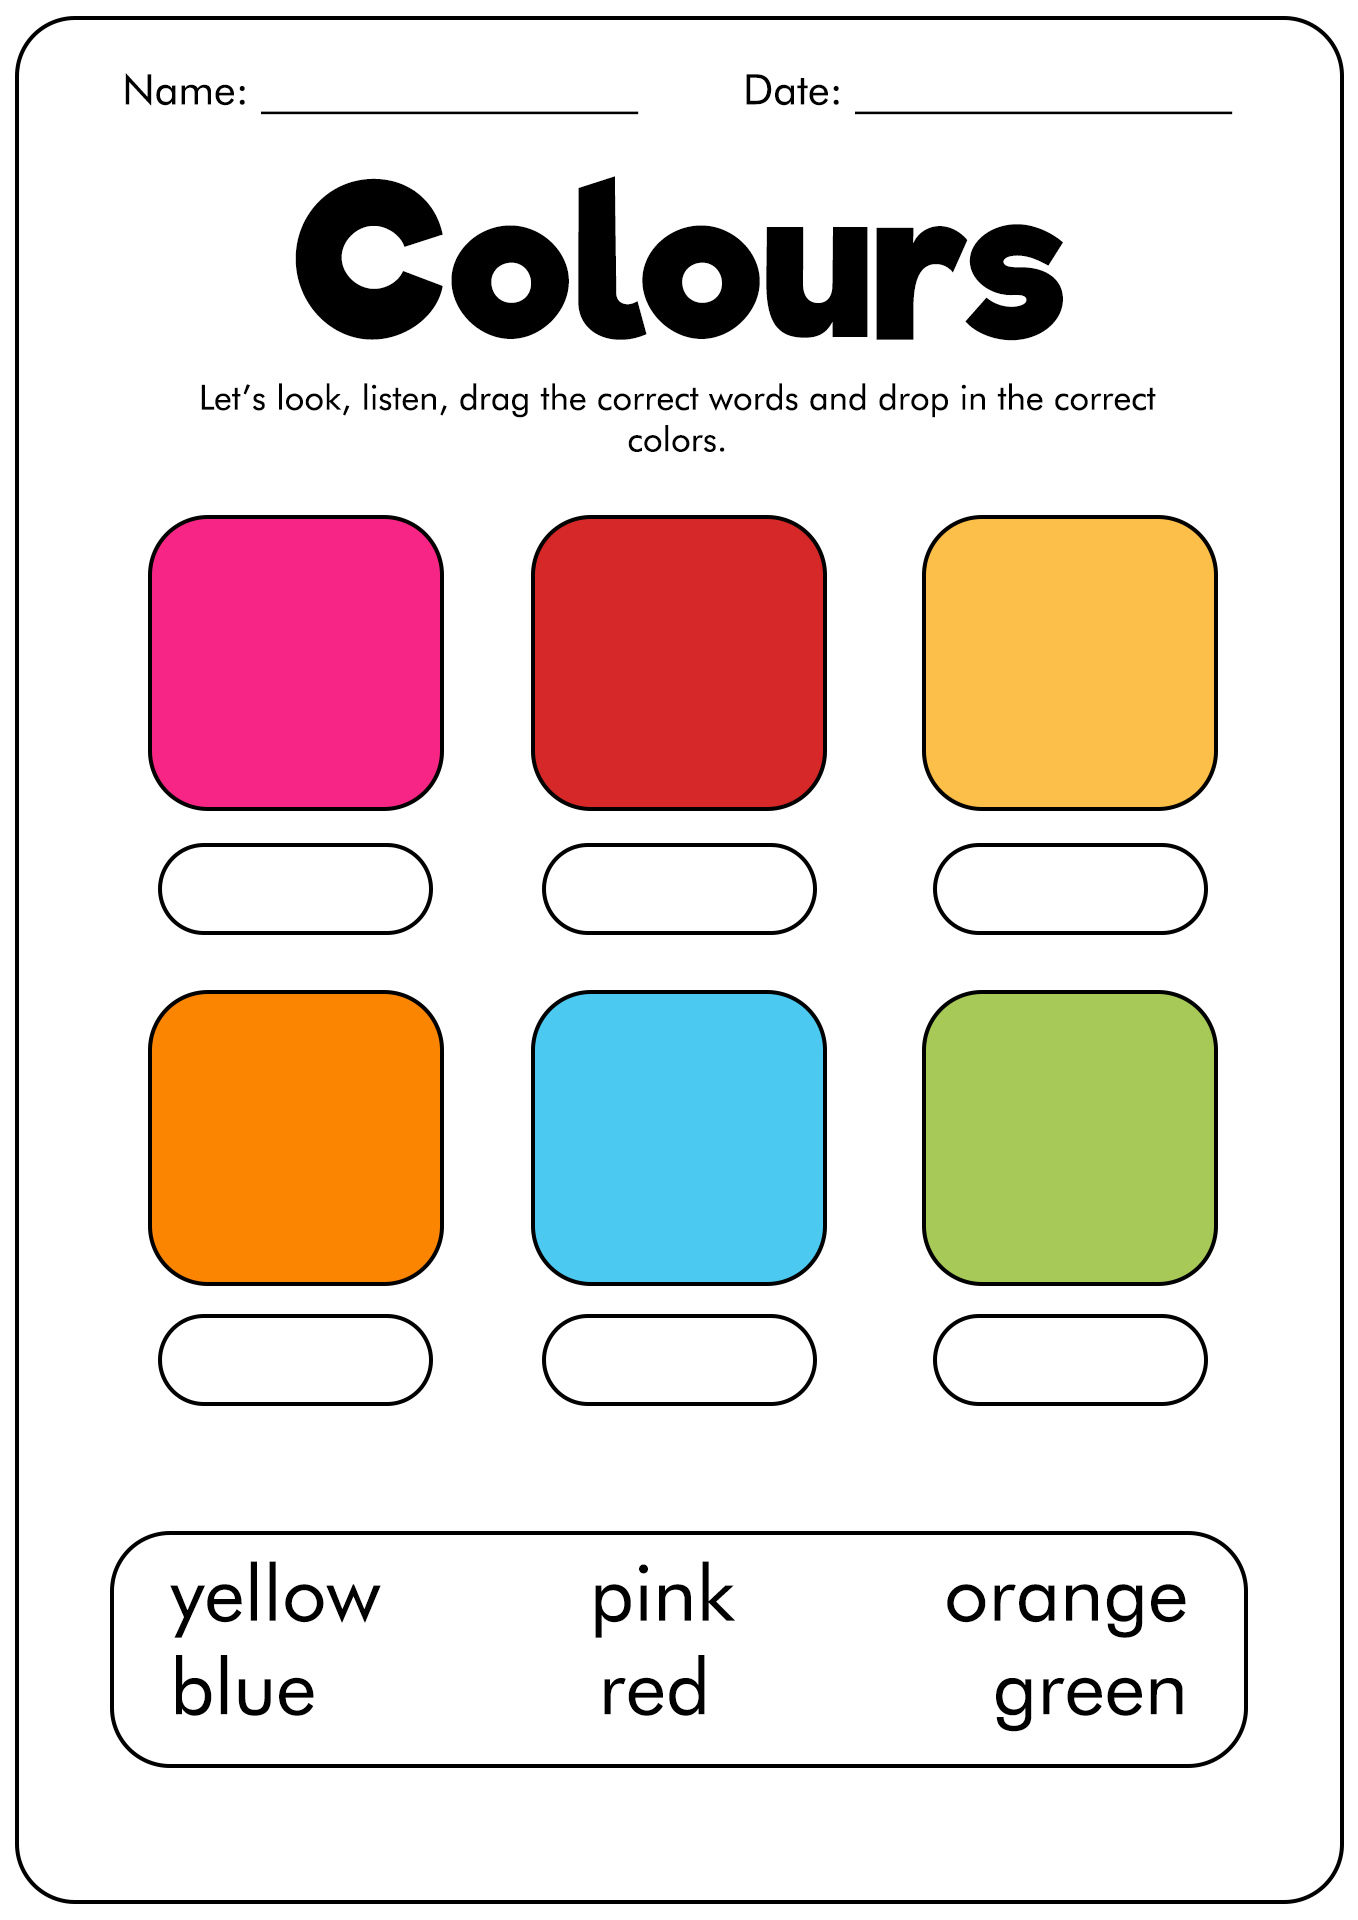 12 Best Images of English Colors Worksheet Colors